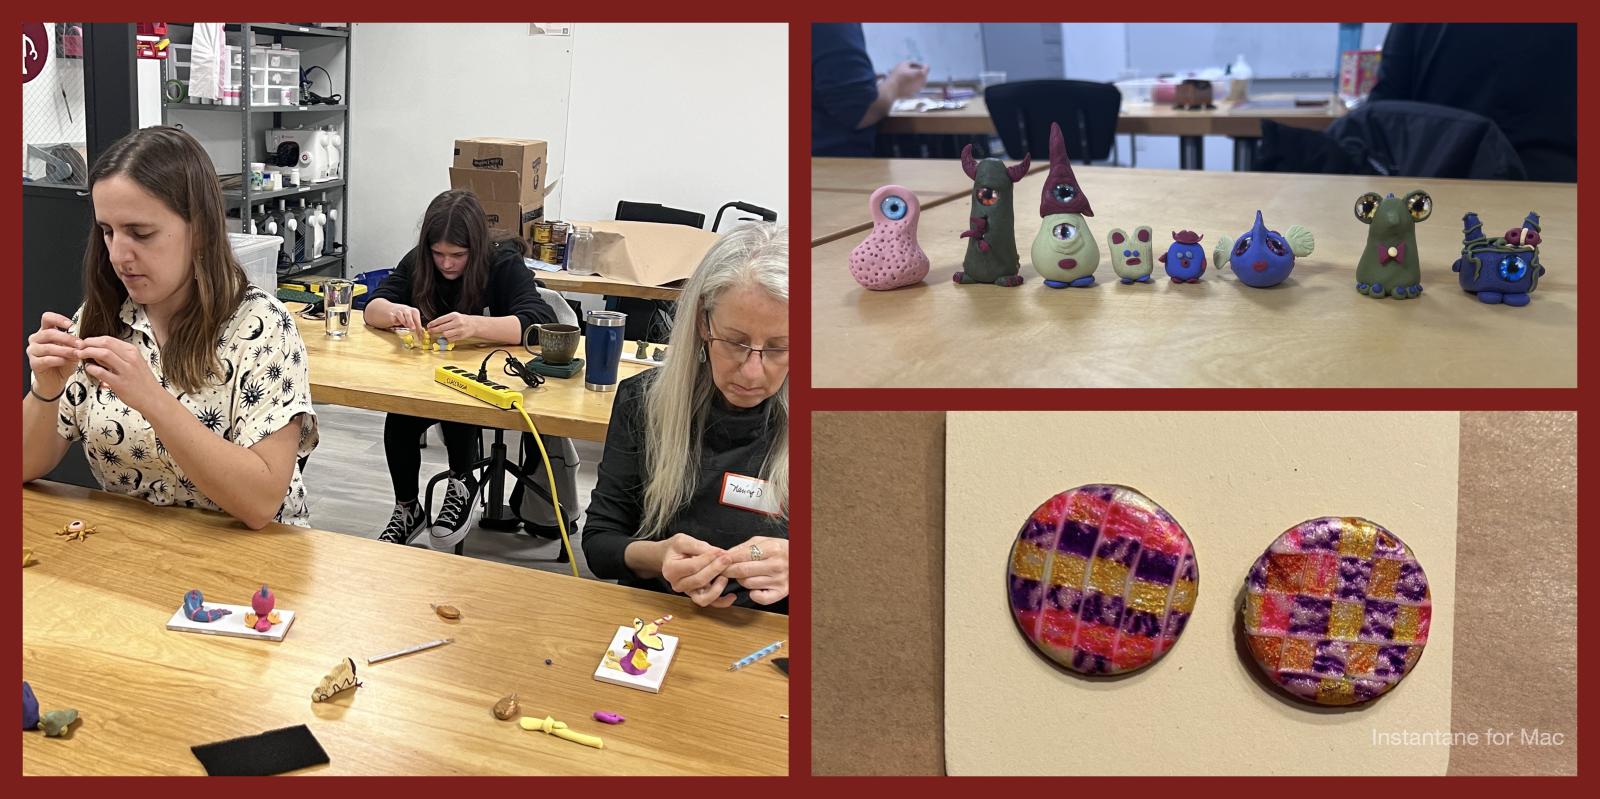 This collage depicts three different scenes from a polymer clay crafting session. In the first two images, individuals of various ages are focused on molding and shaping colorful polymer clay at a workshop table, while the third image showcases a collection of whimsically shaped and vividly colored clay creatures lined up, alongside two large, patterned clay discs.